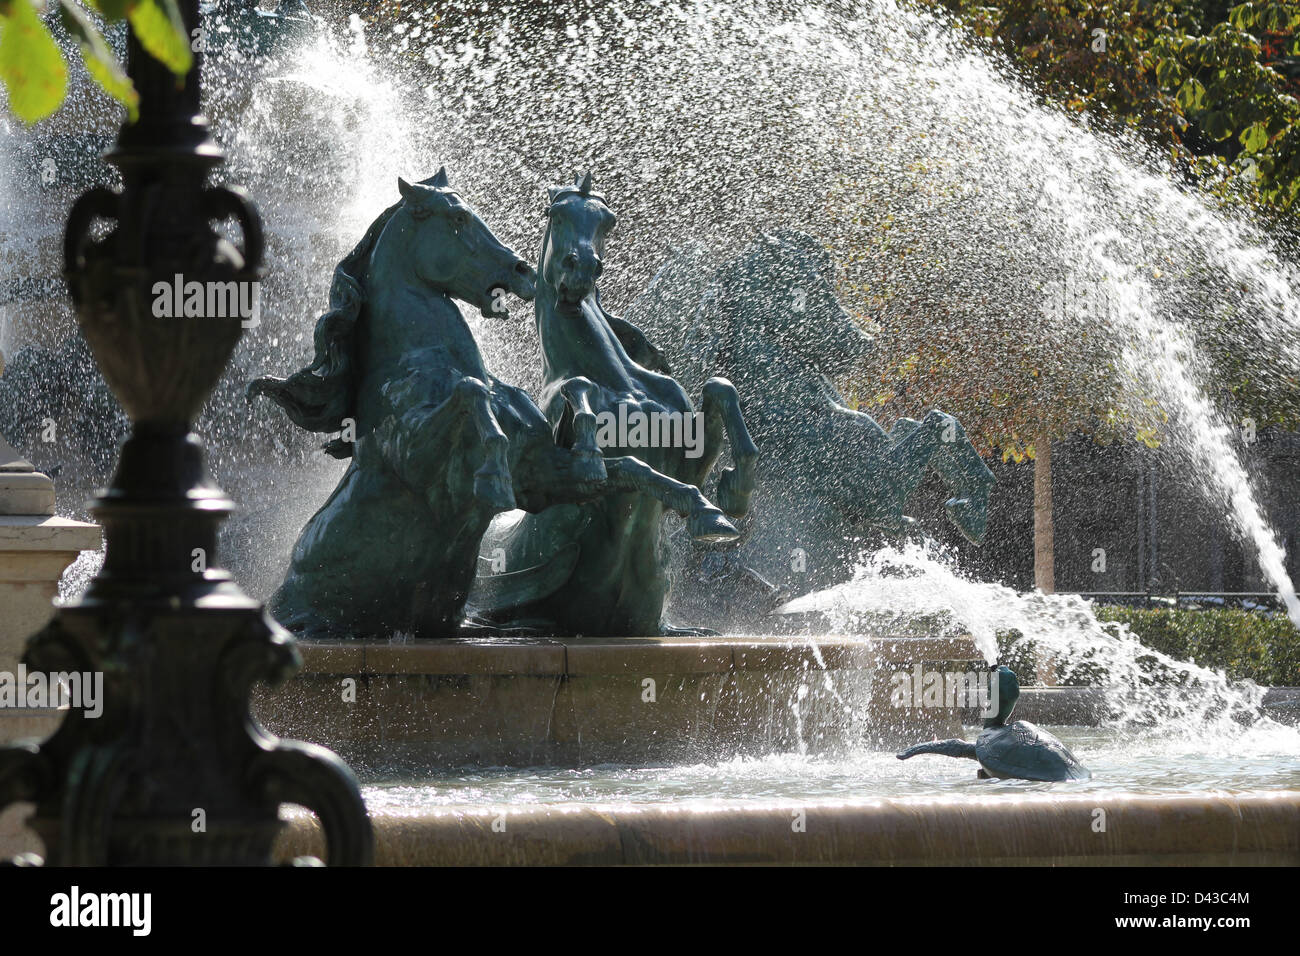 One of the famous 'horse' fountains in Paris (Luxembourg gardens) Stock Photo